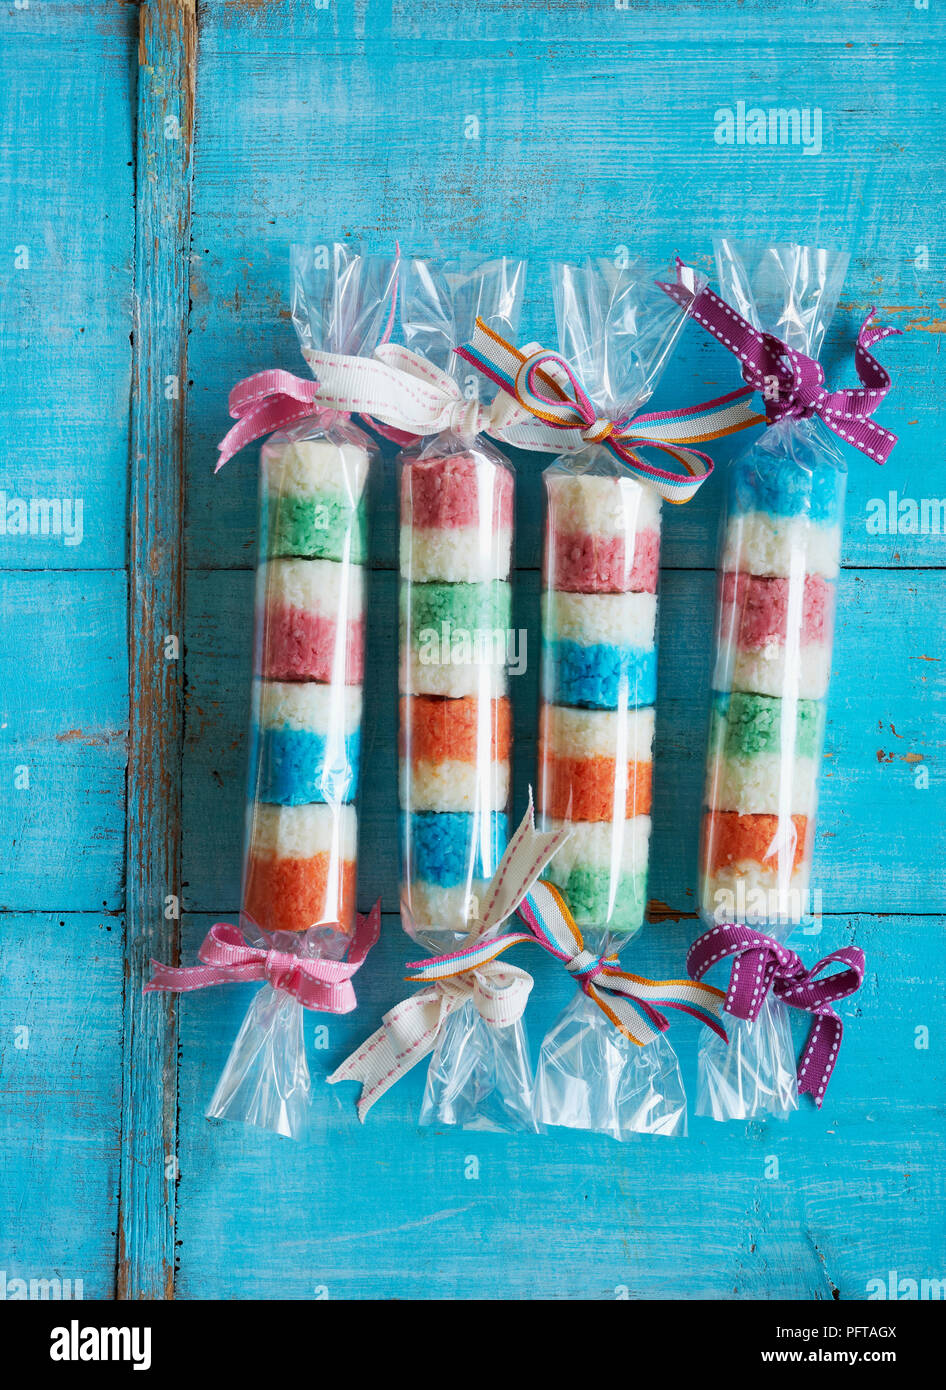 Coconut bites using different colours of food colourant, wrapped up in plastic and ribbon ties Stock Photo